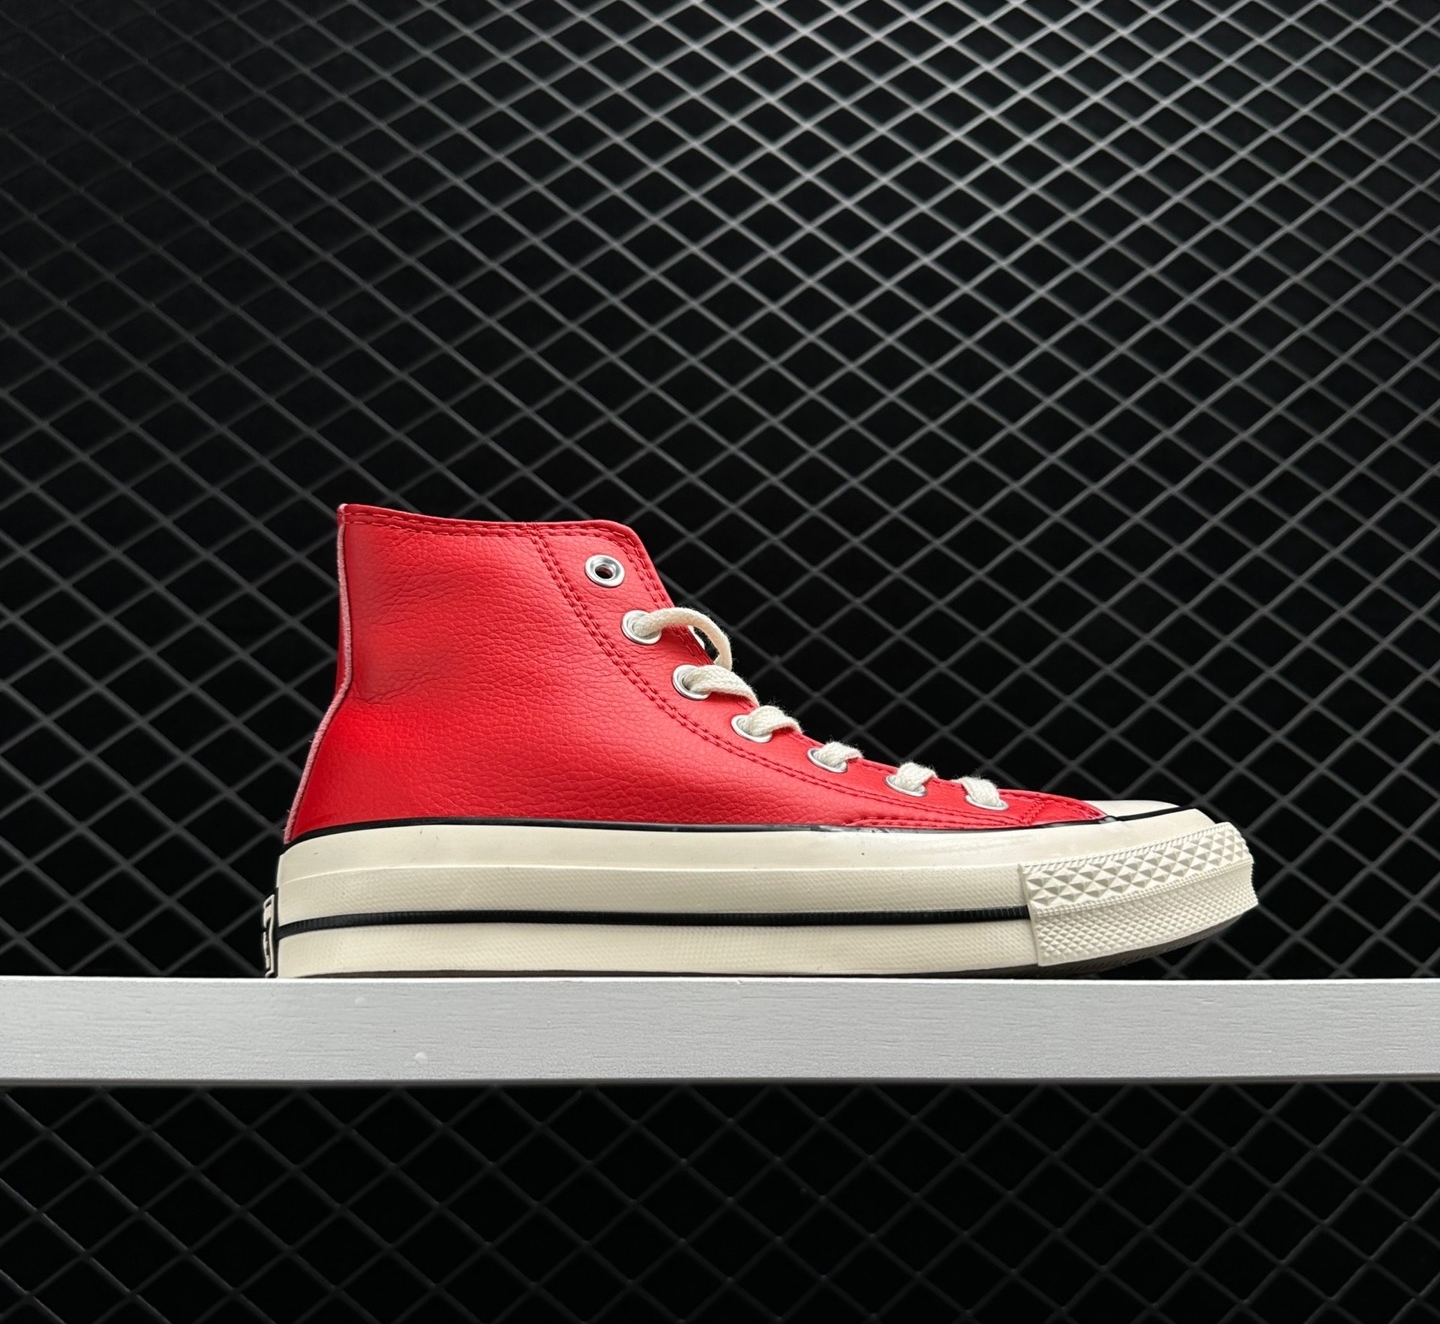 Converse Chuck 70 High 'University Red' 170370C - Classic Style & Vibrant Color | Limited Stock